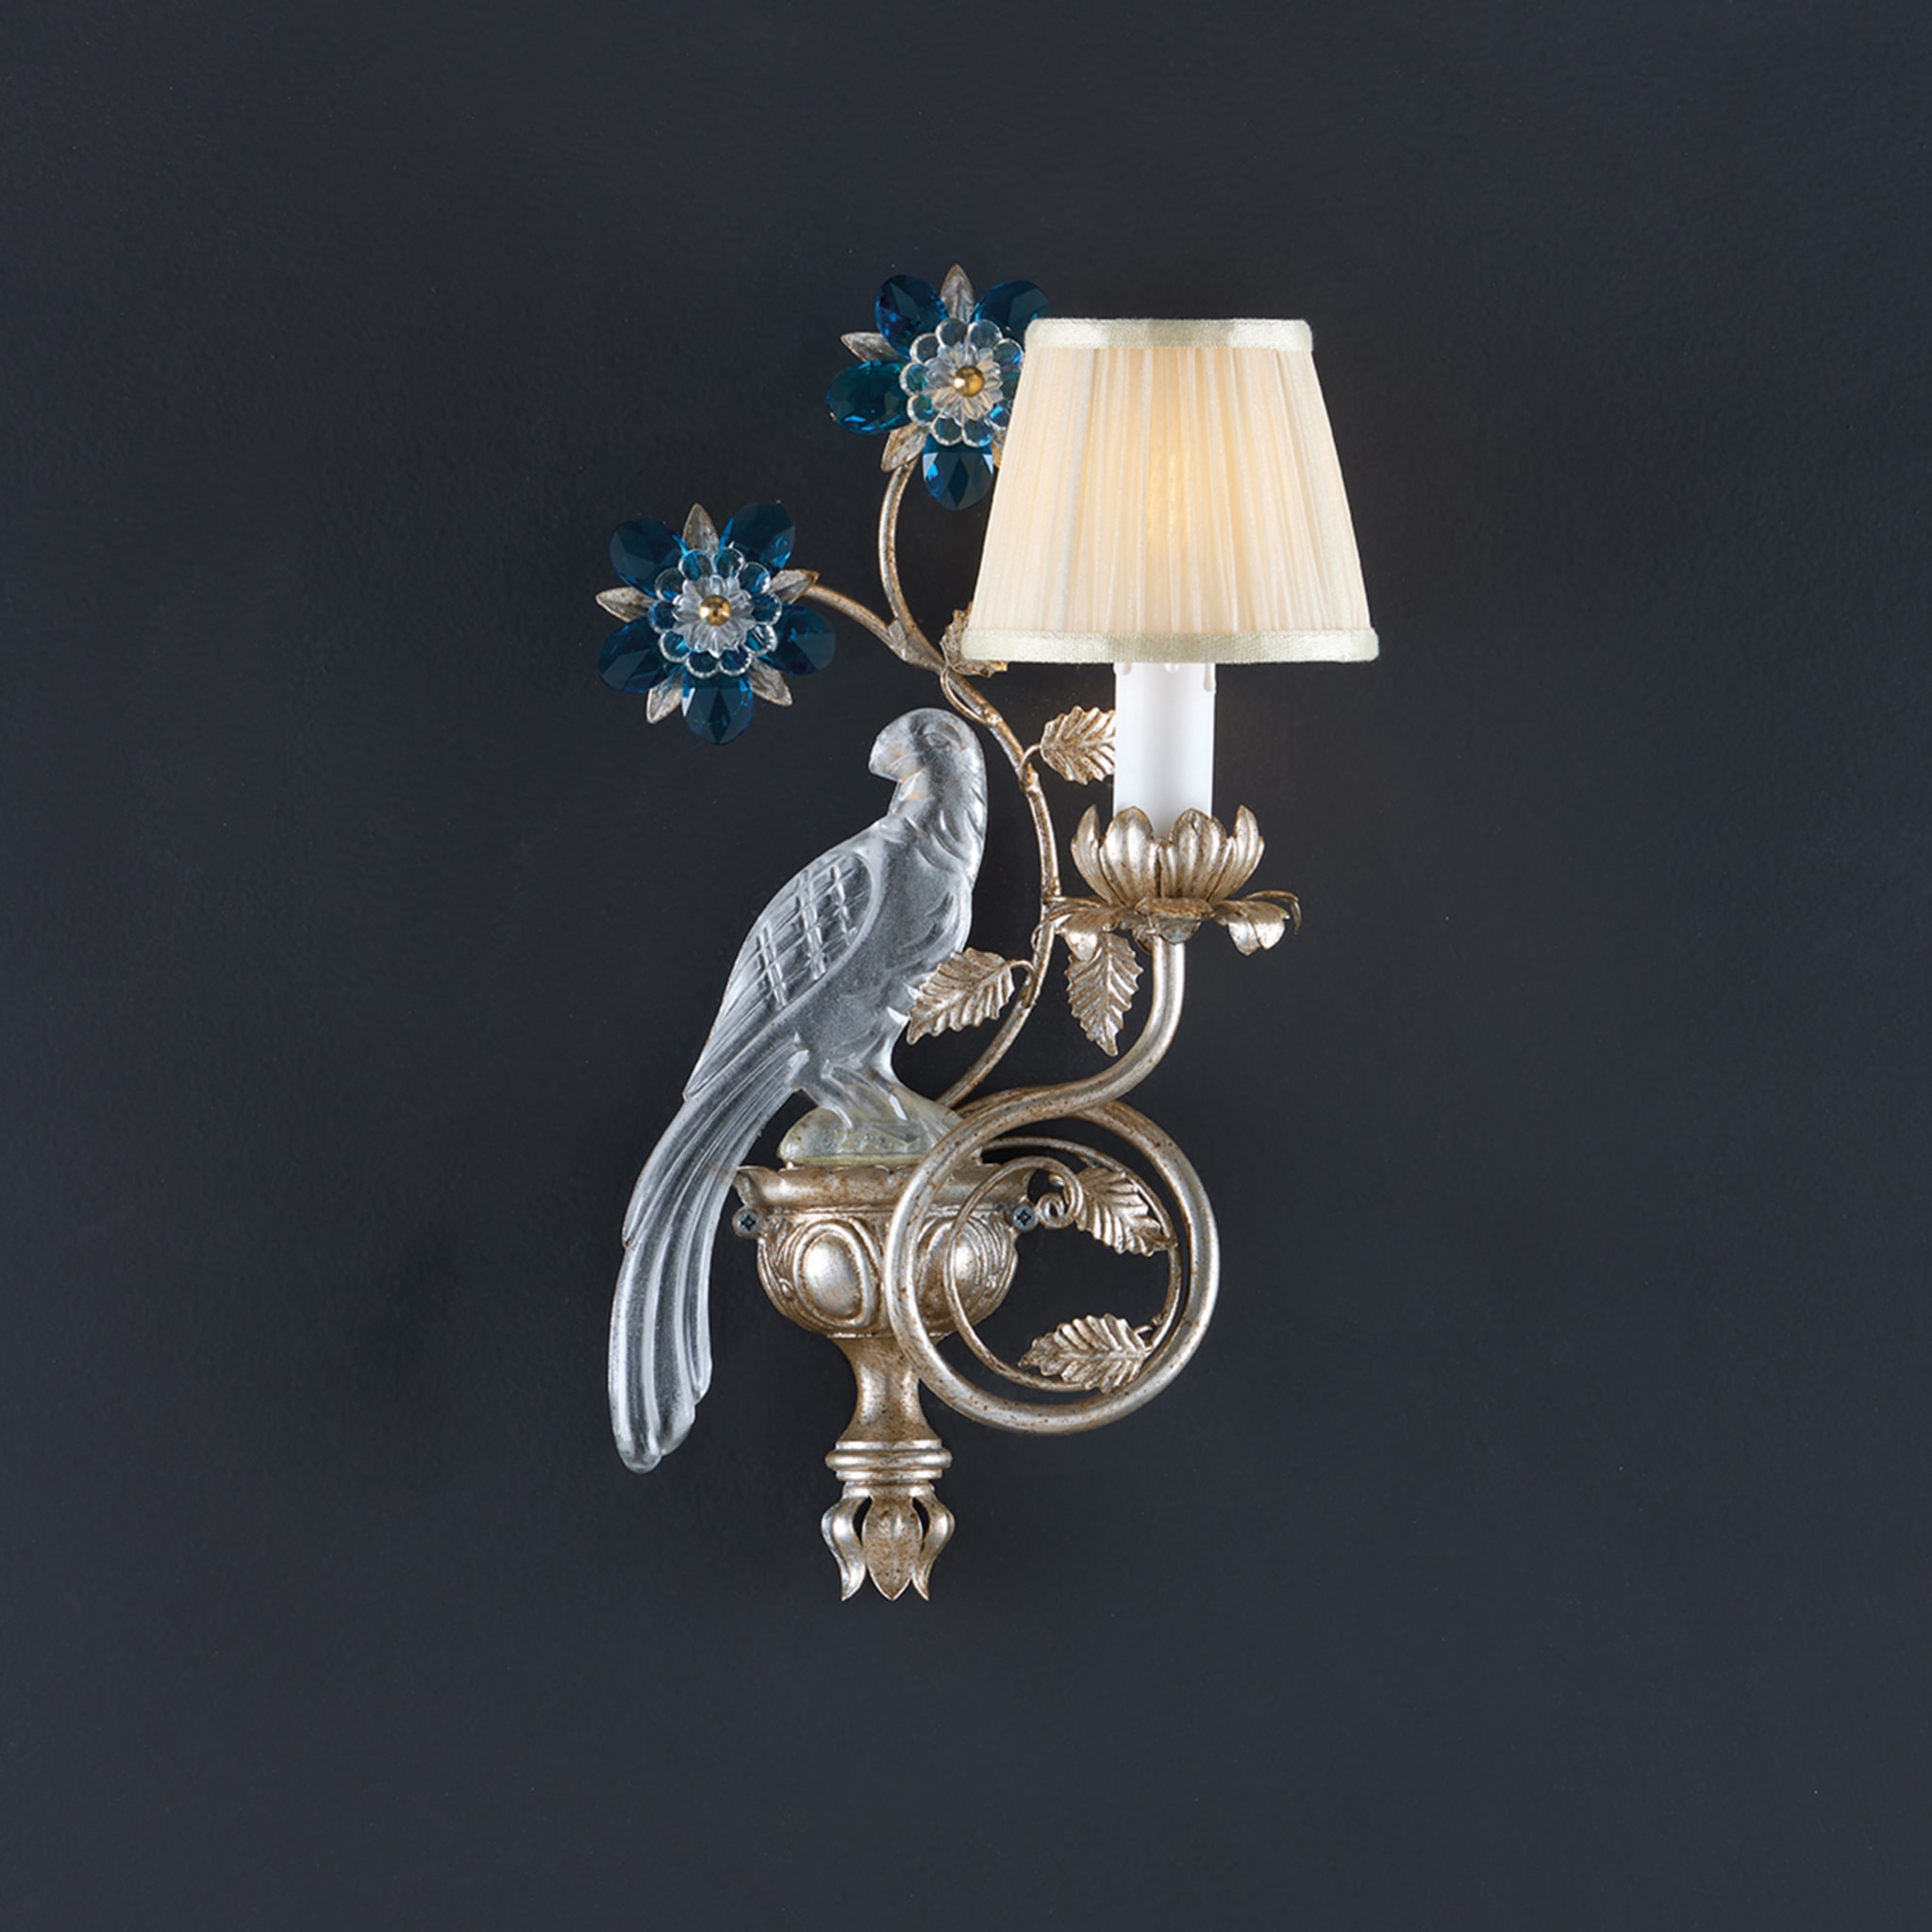 Right Sconce 1406/A1 - Alternative view 1